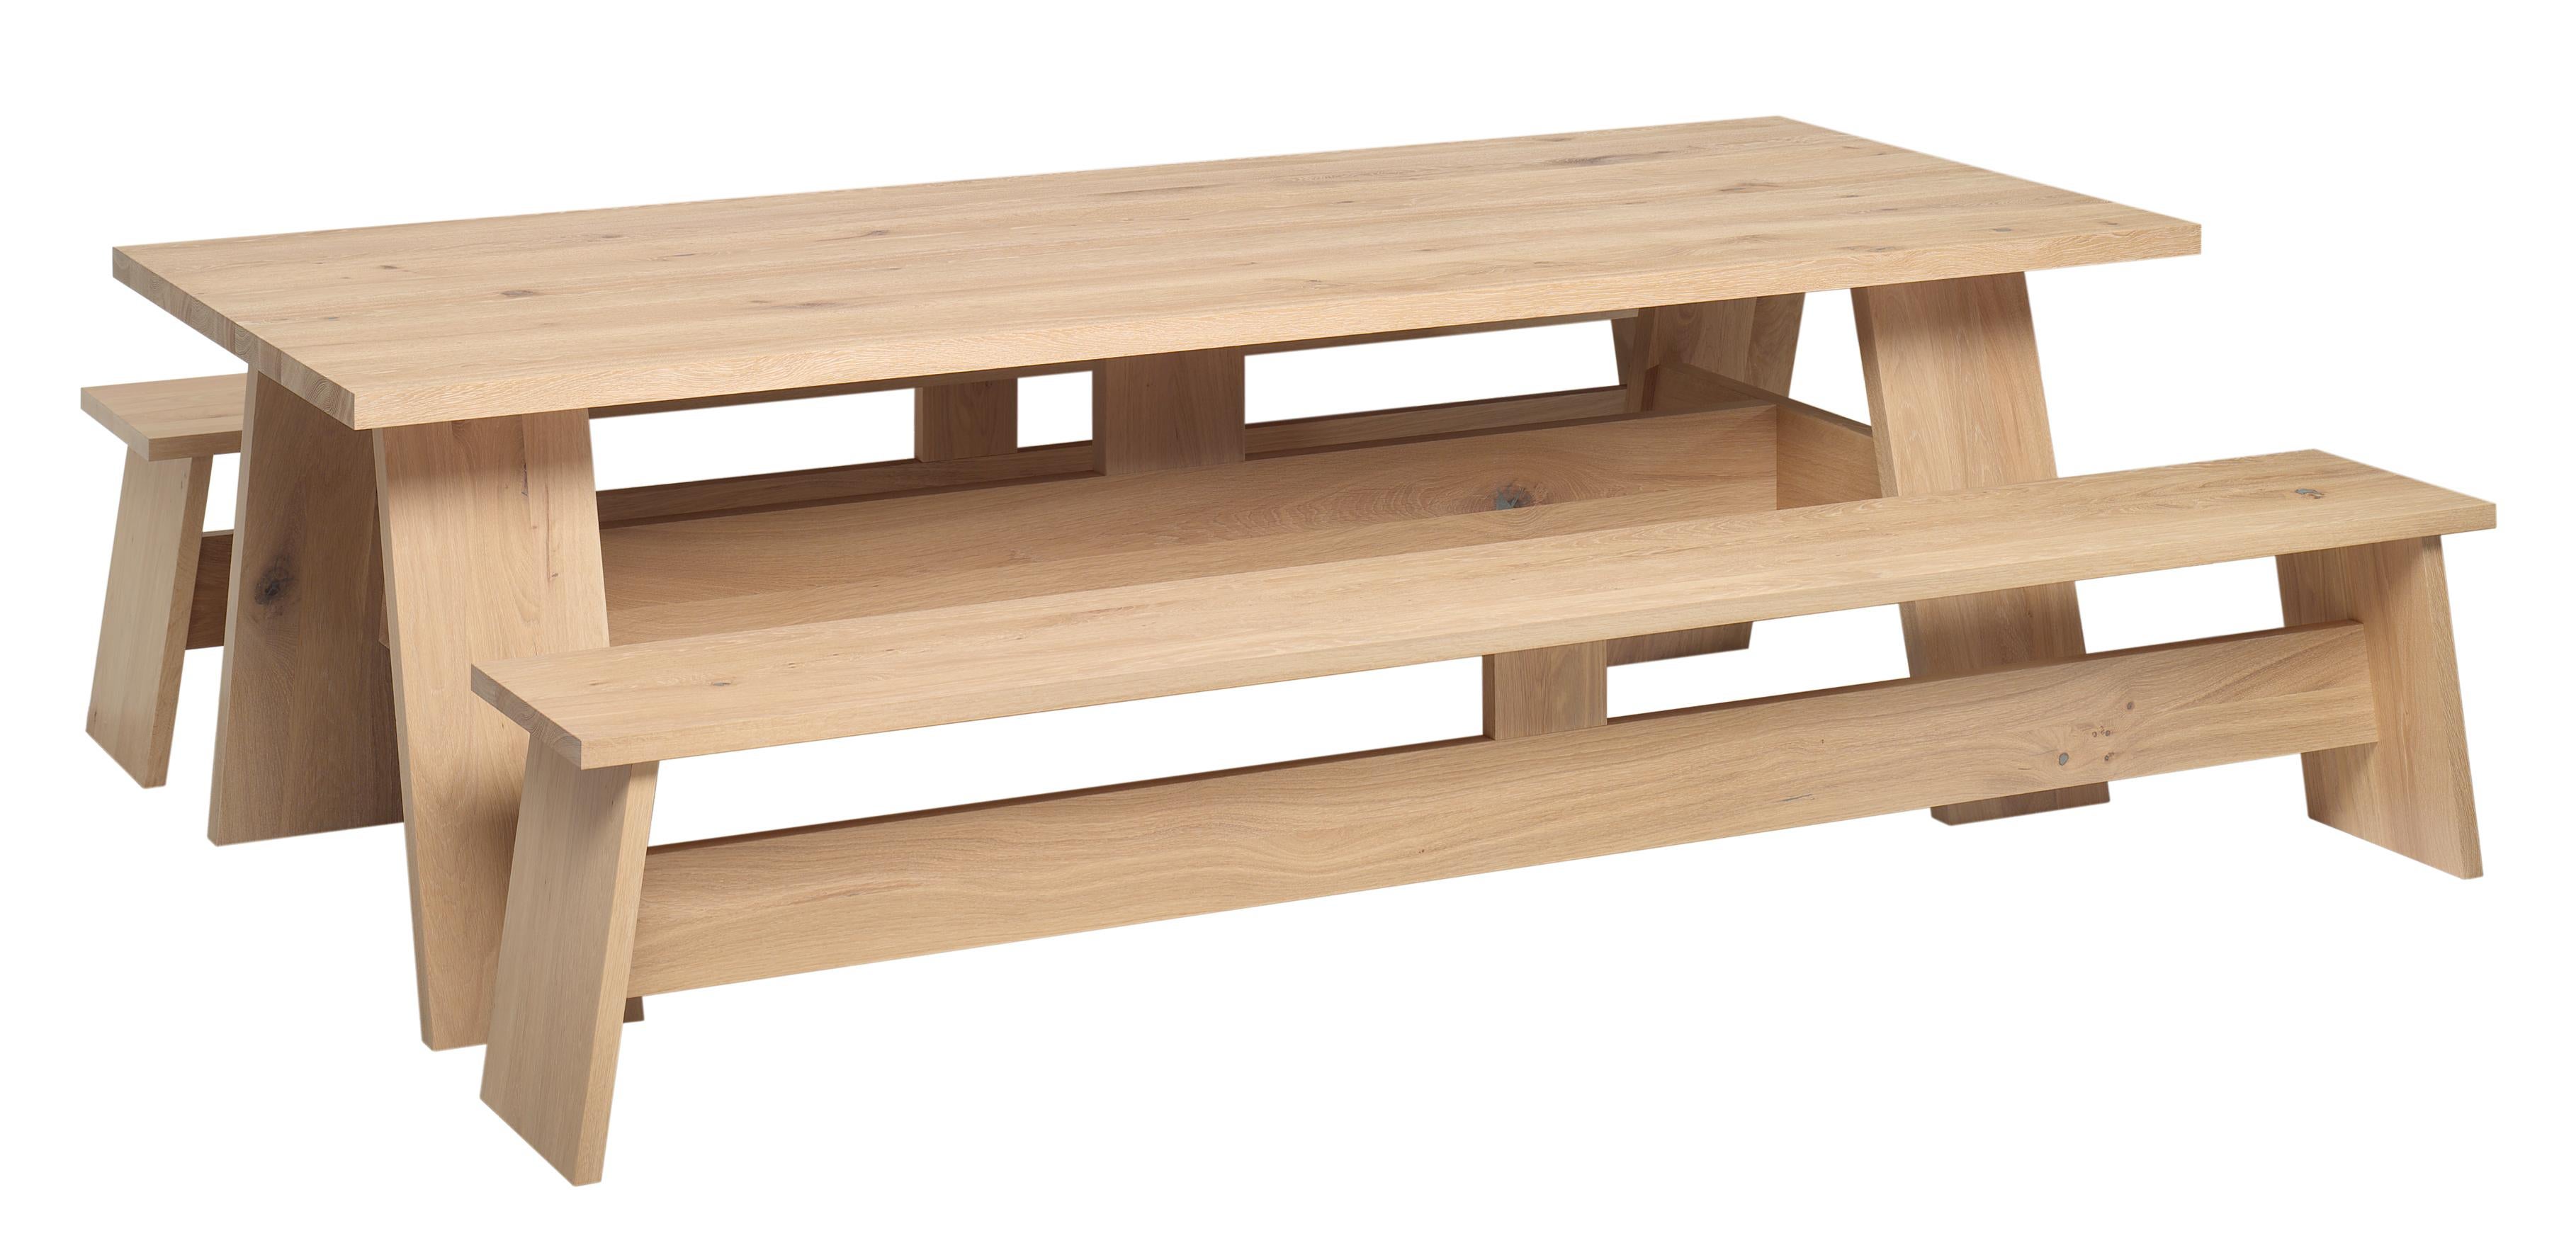 e15 Customizable Fawley Wood Bench by David Chipperfield In New Condition For Sale In New York, NY